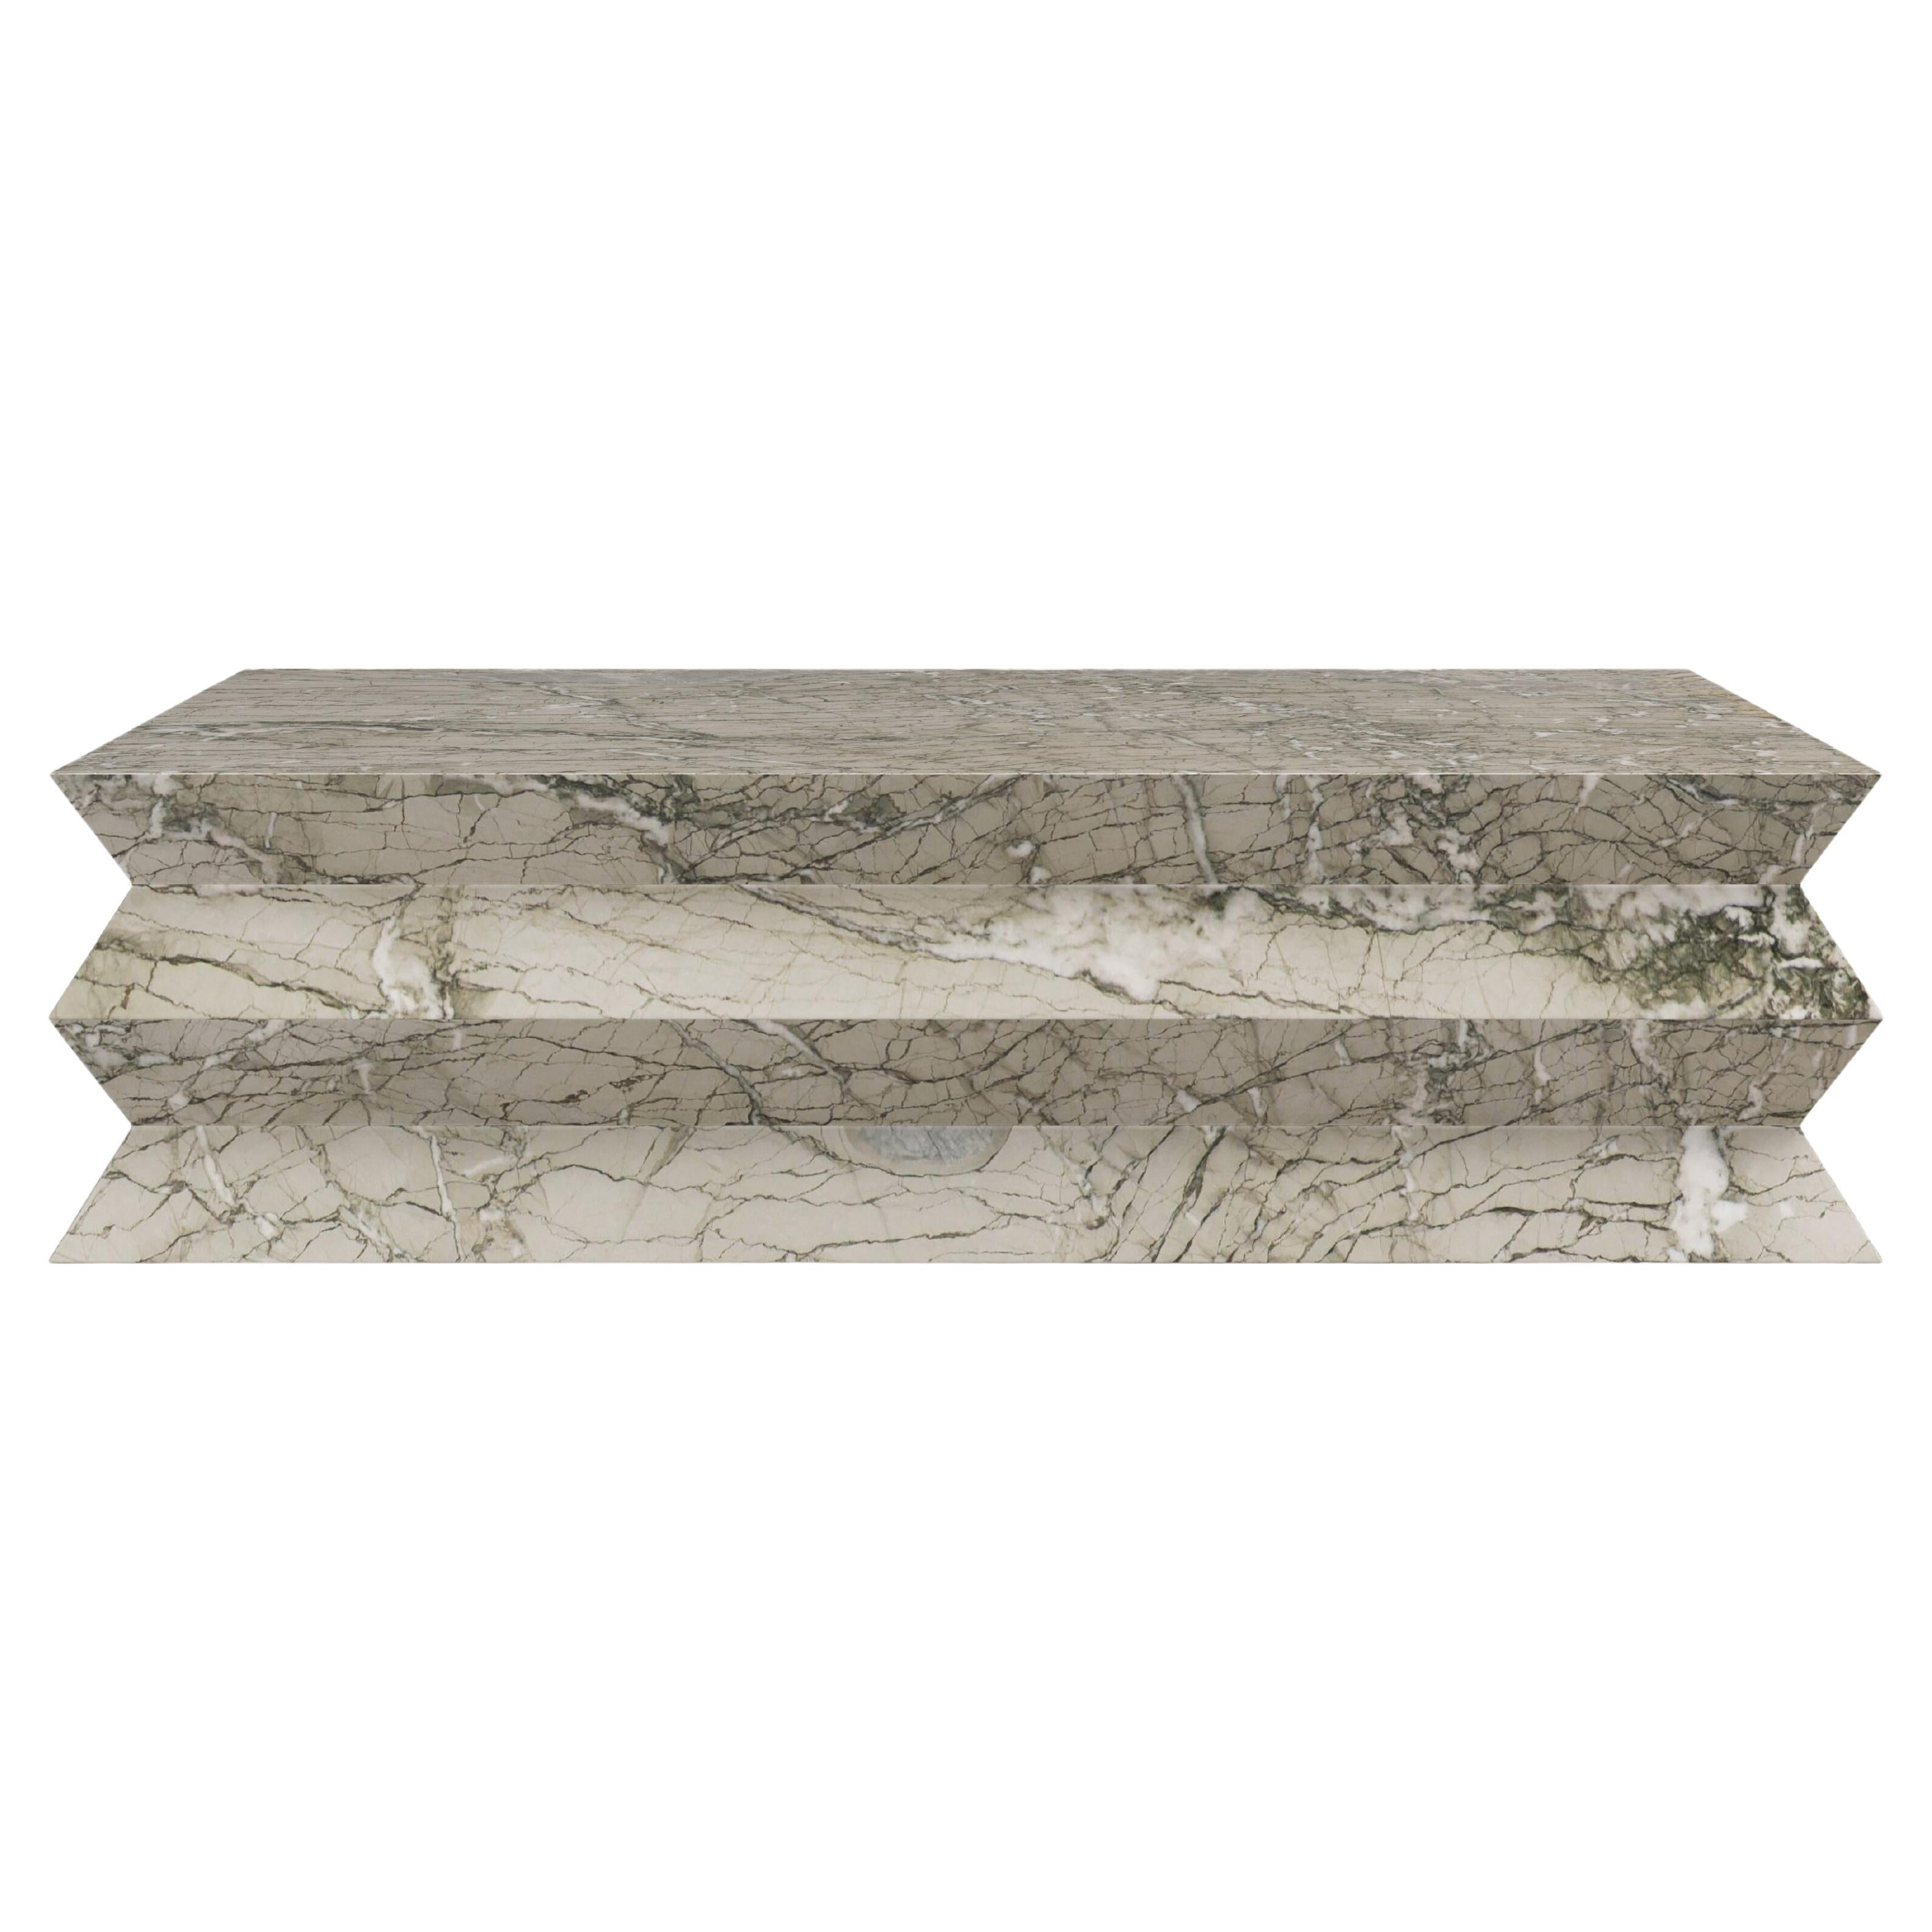 FORM(LA) Grinza Rectangle Coffee Table 48"L x 30"W x 16"H Verde Antigua Marble For Sale